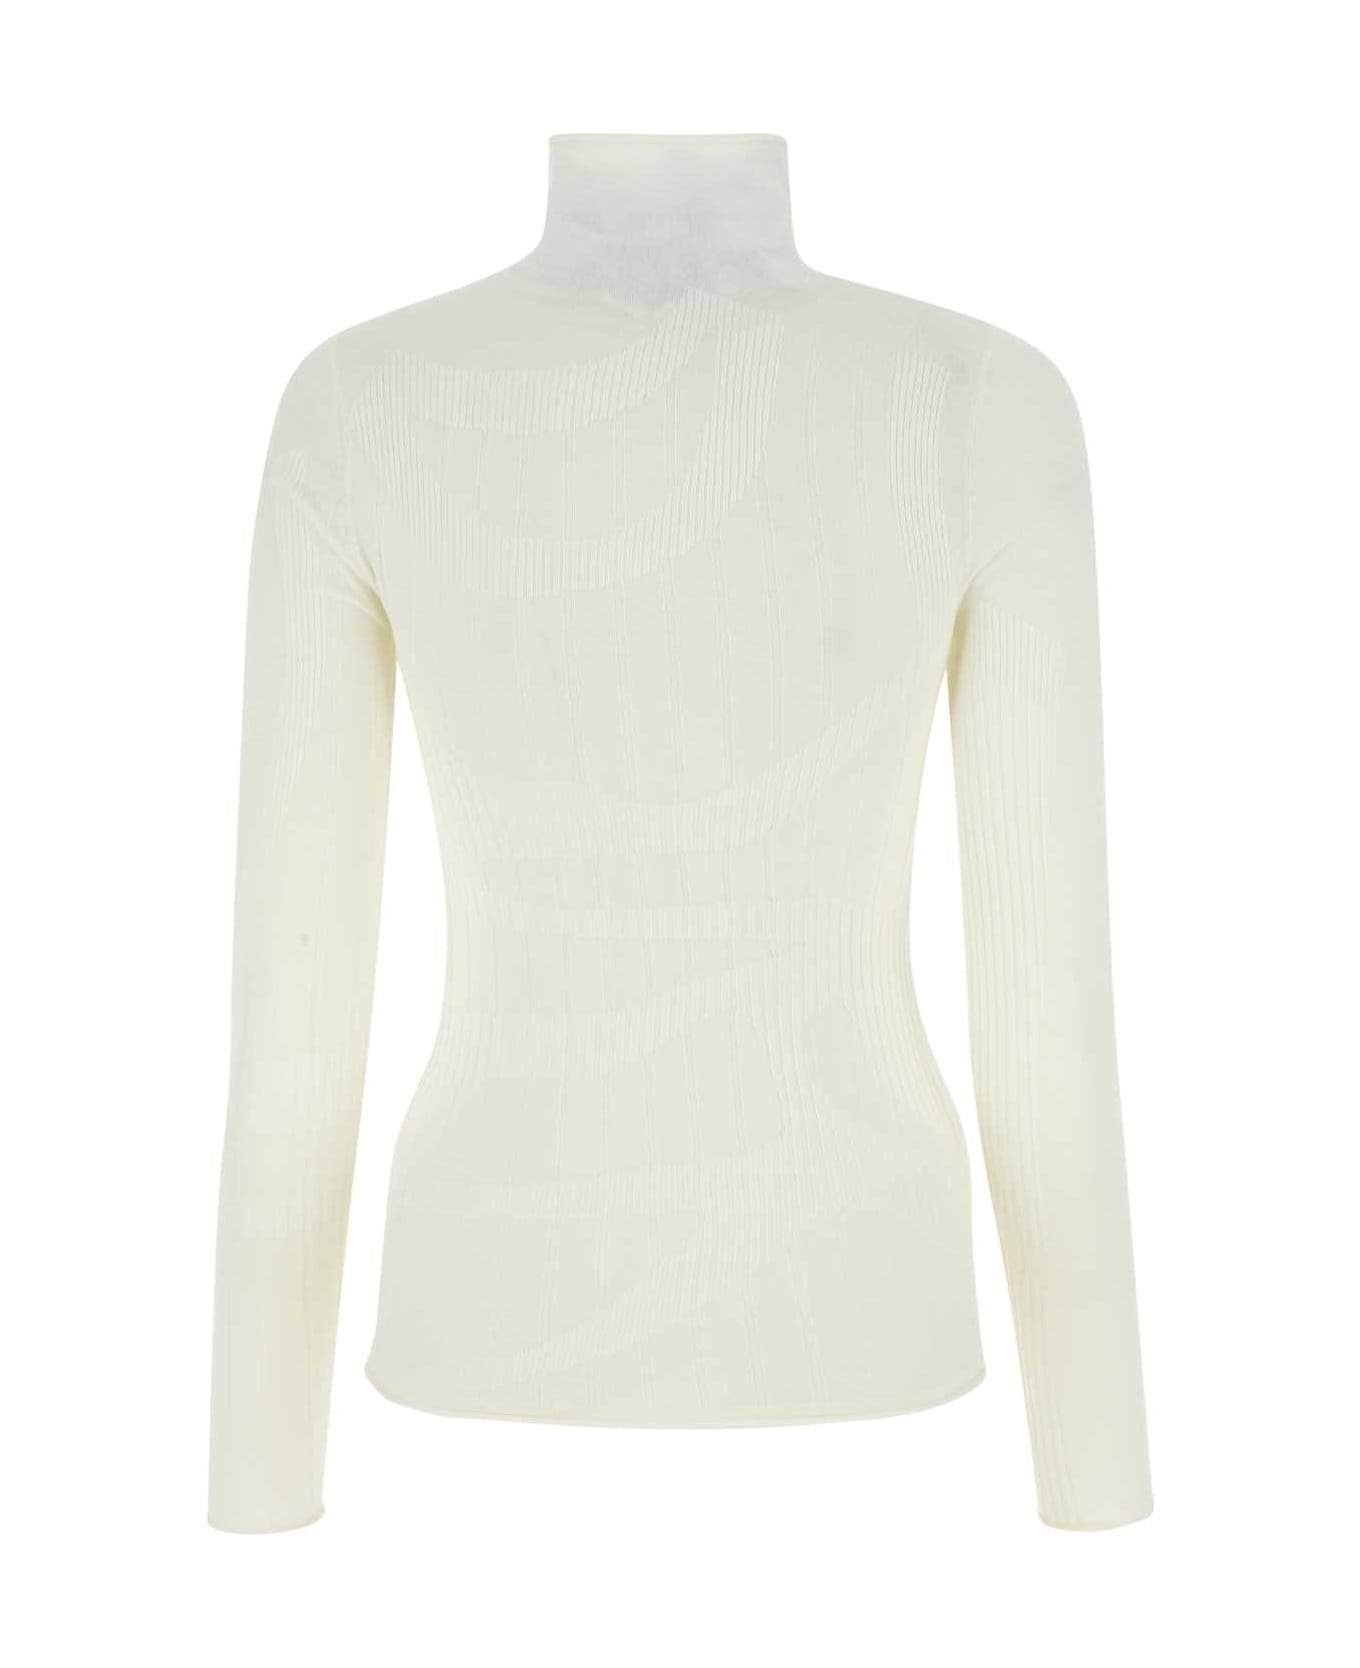 Dion Lee Ivory Stretch Wool Blend Top - WHITE